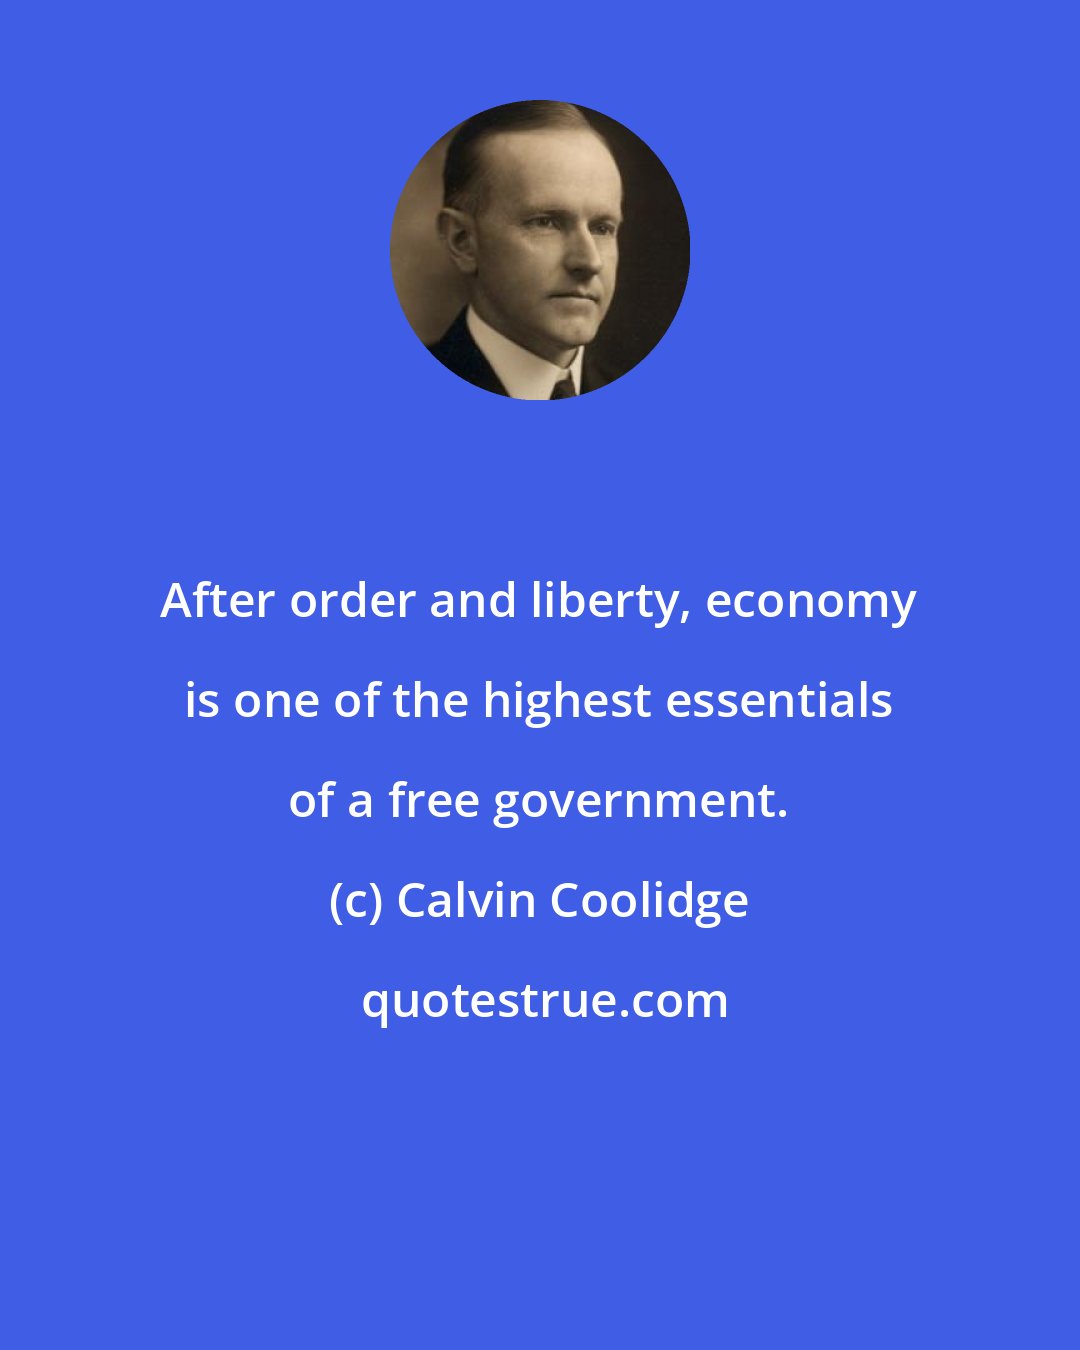 Calvin Coolidge: After order and liberty, economy is one of the highest essentials of a free government.